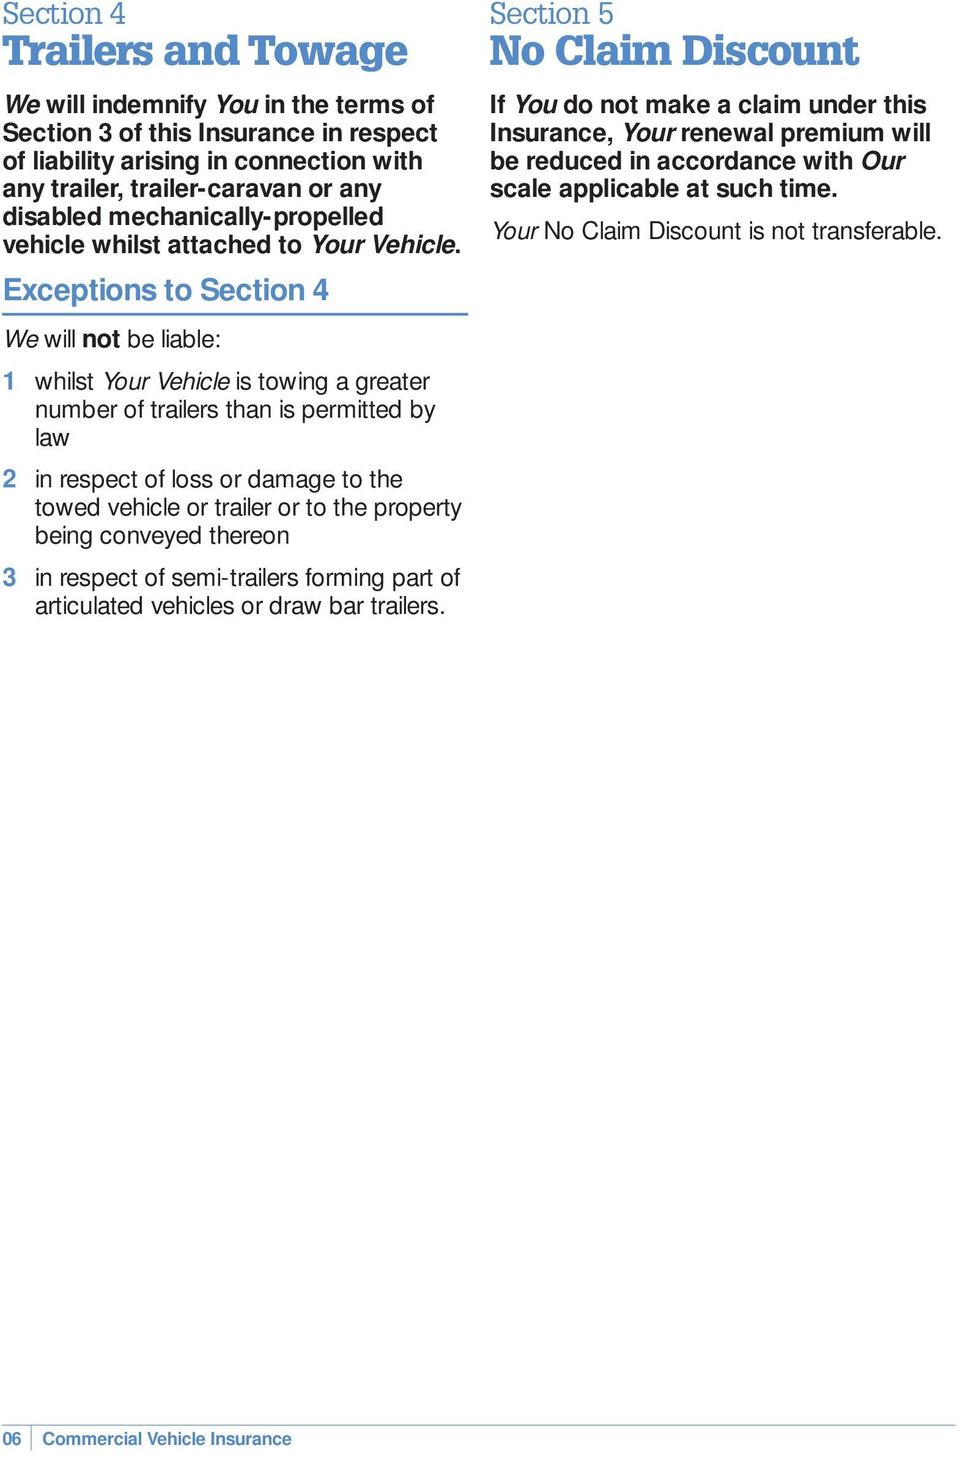 Exceptions to Section 4 We will not be liable: 1 whilst Your Vehicle is towing a greater number of trailers than is permitted by law 2 in respect of loss or damage to the towed vehicle or trailer or